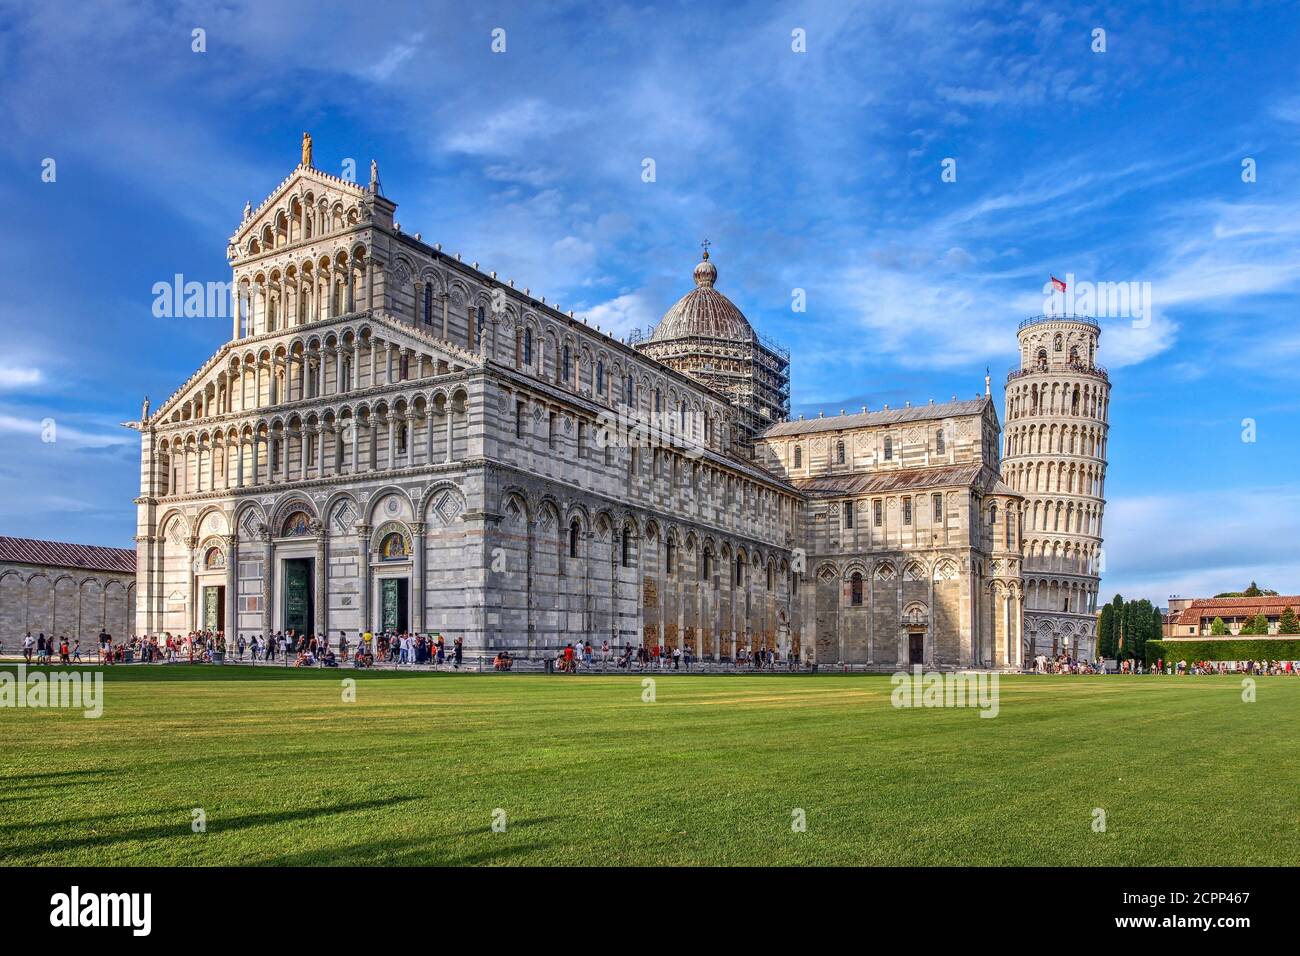 Evening scene in Pisa, Tuscany, Italy with the Duomo and the Leaning Tower in Campo dei Miracoli. Stock Photo